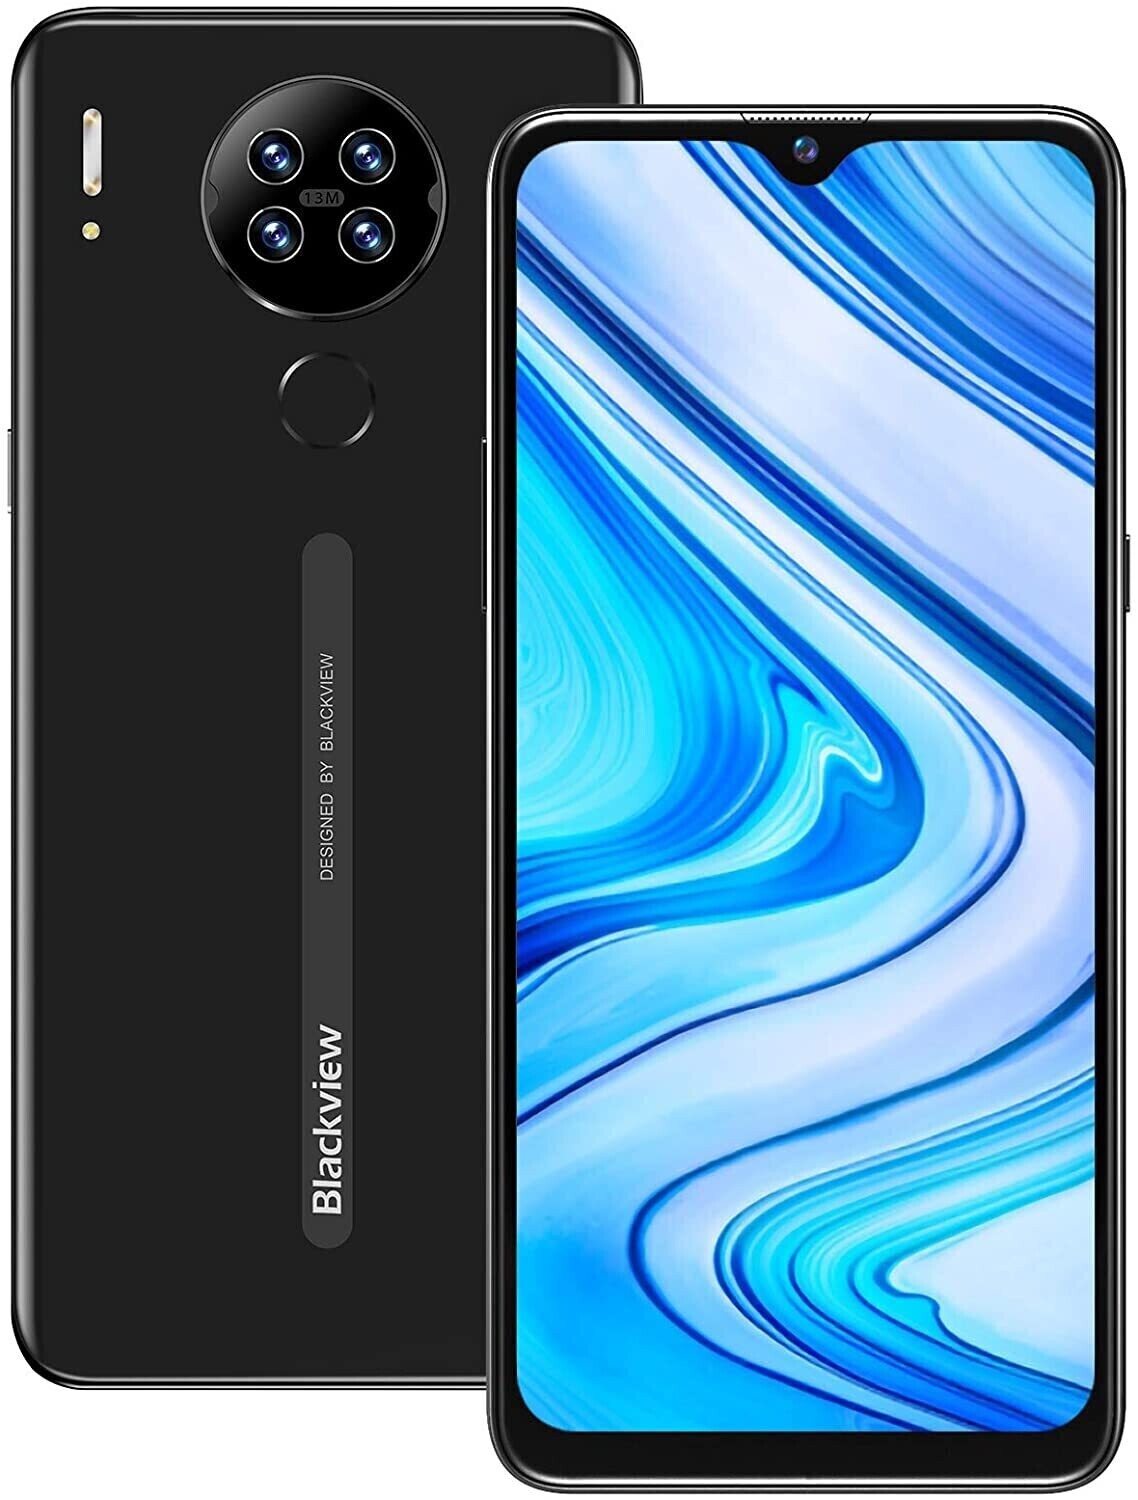 BOXED SEALED Blackview A80 16GB UNLOCKED